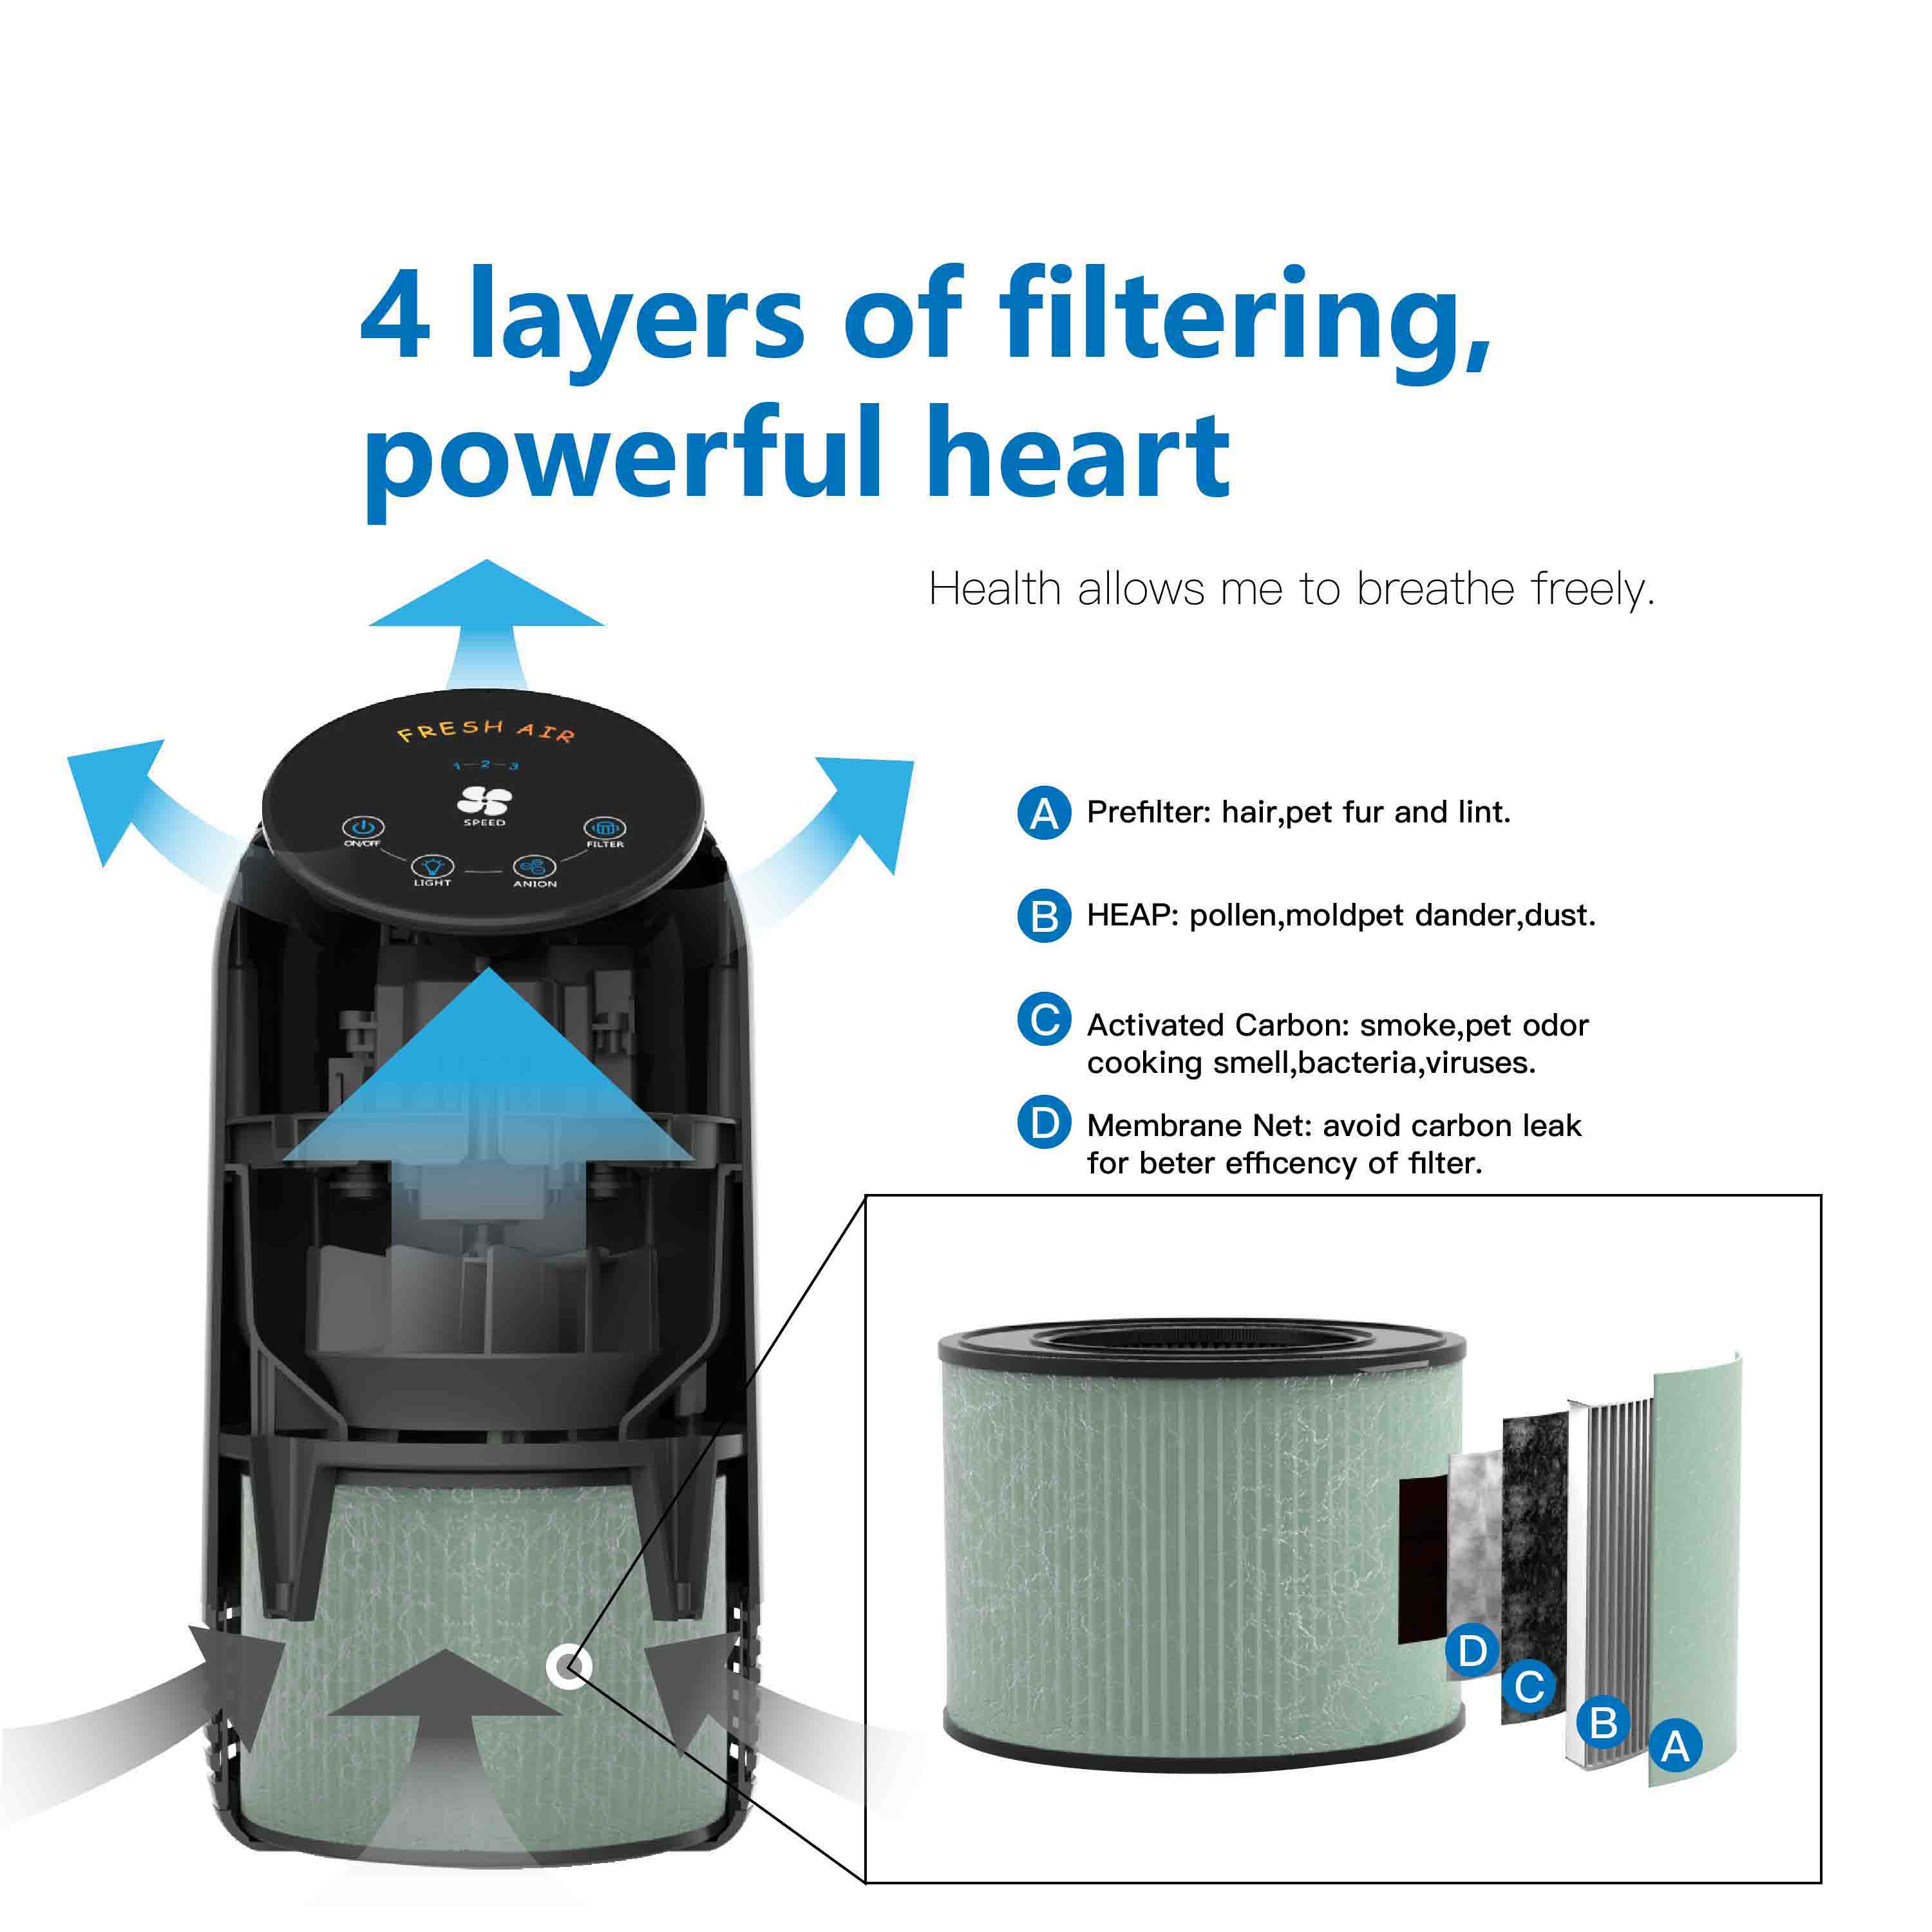 Wholesale Air Purifier - Enhance Indoor Air Quality with Negative Ion Technology and OEM/ODM Options